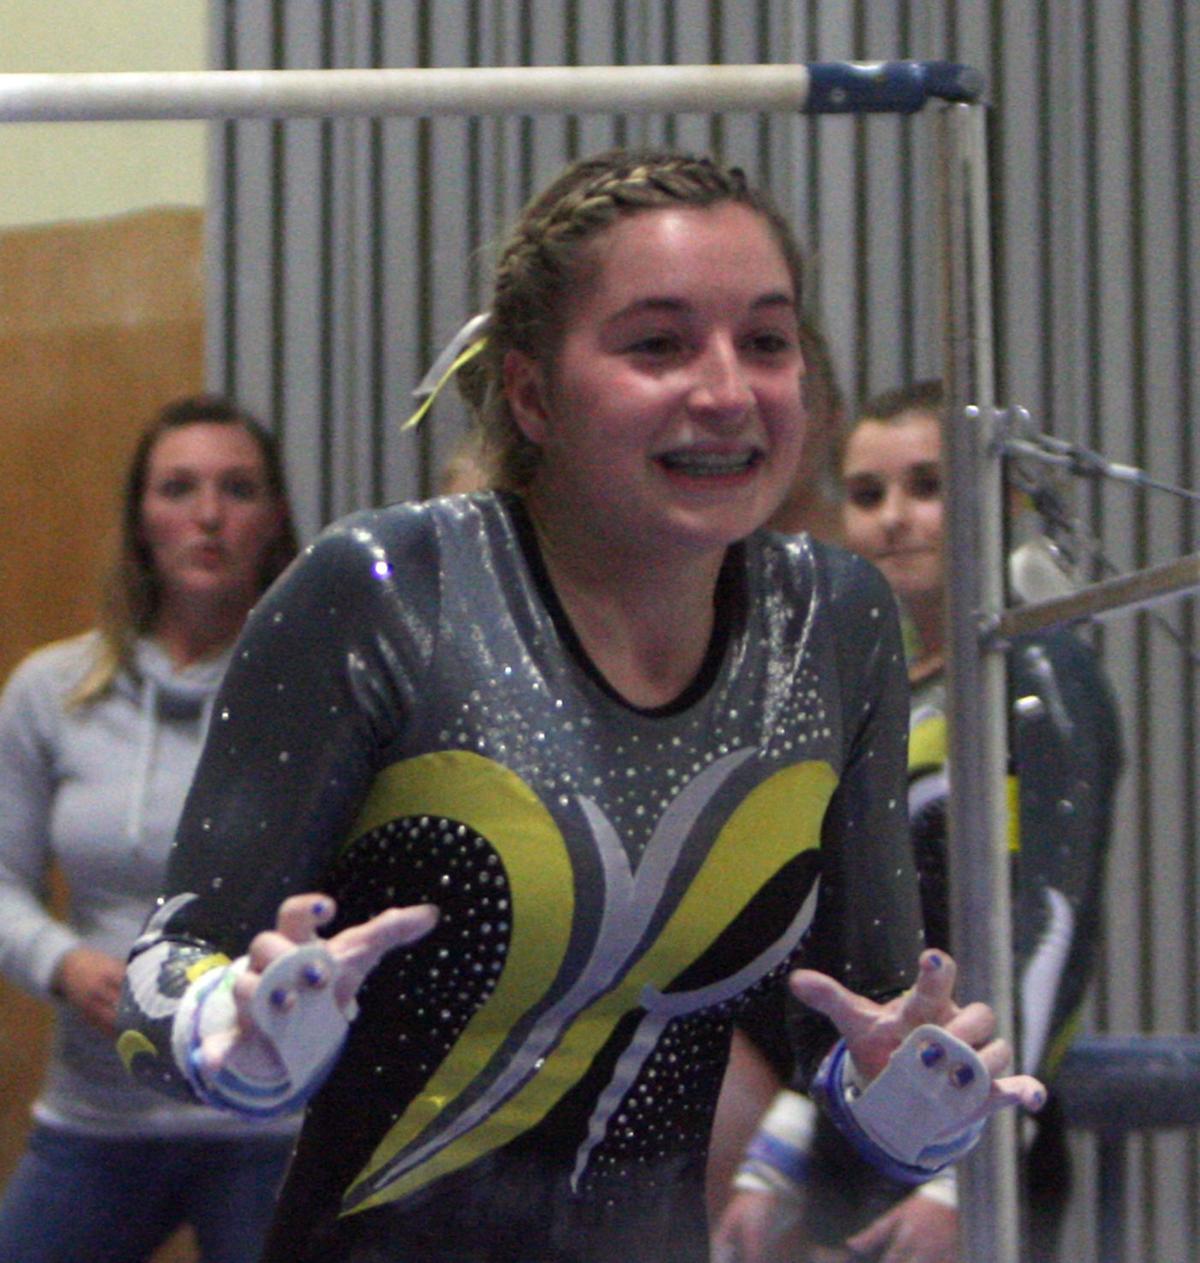 GYMNASTICS: Waupun's Gracie Lenz finding her form at right time, is ...